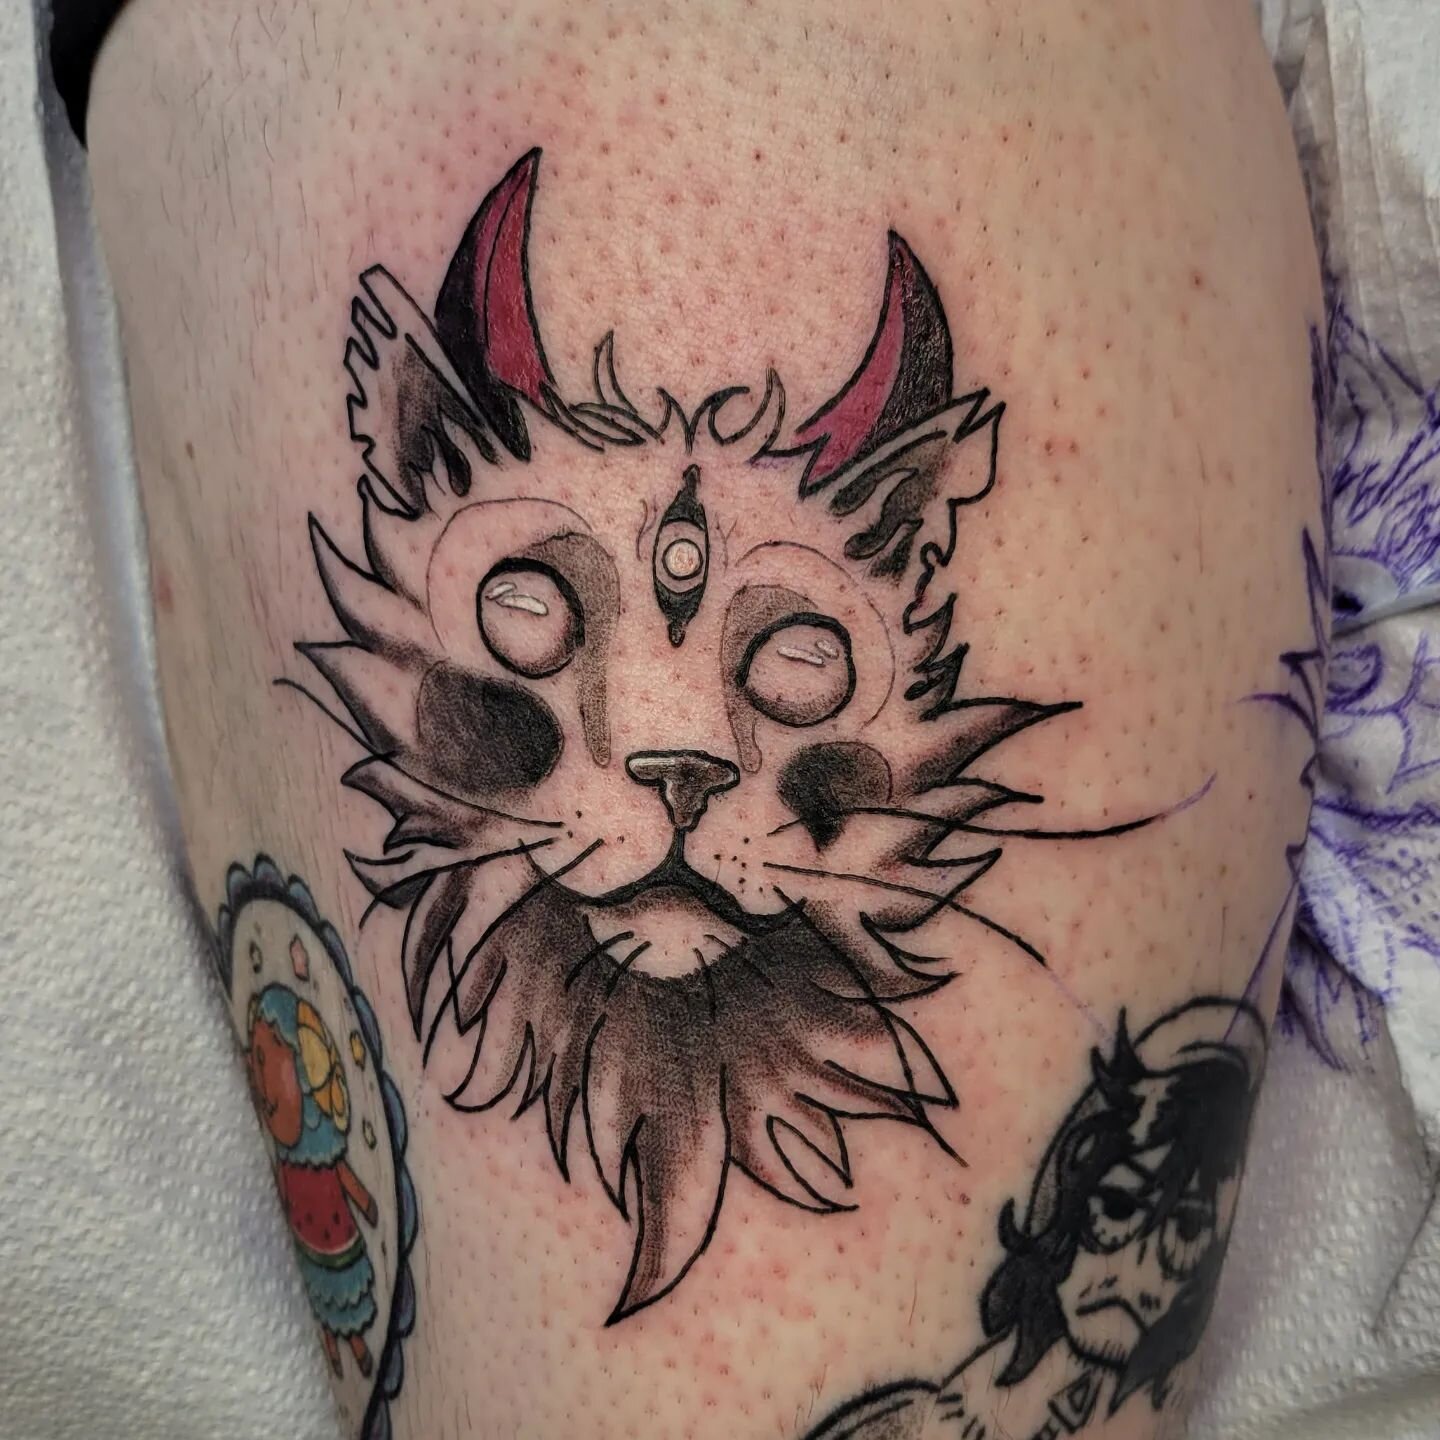 👿 Demon Kitty 👿
Thank you @skeletonhatss for grabbing my Demon Kitty flash. 

There's more posted and I've been making some Halloween Flash sheets I'll post about super soon! 

We heading into the 🎃💀🎃 season my spooky sinners. 
.
.
.
.
.
#pdxtat